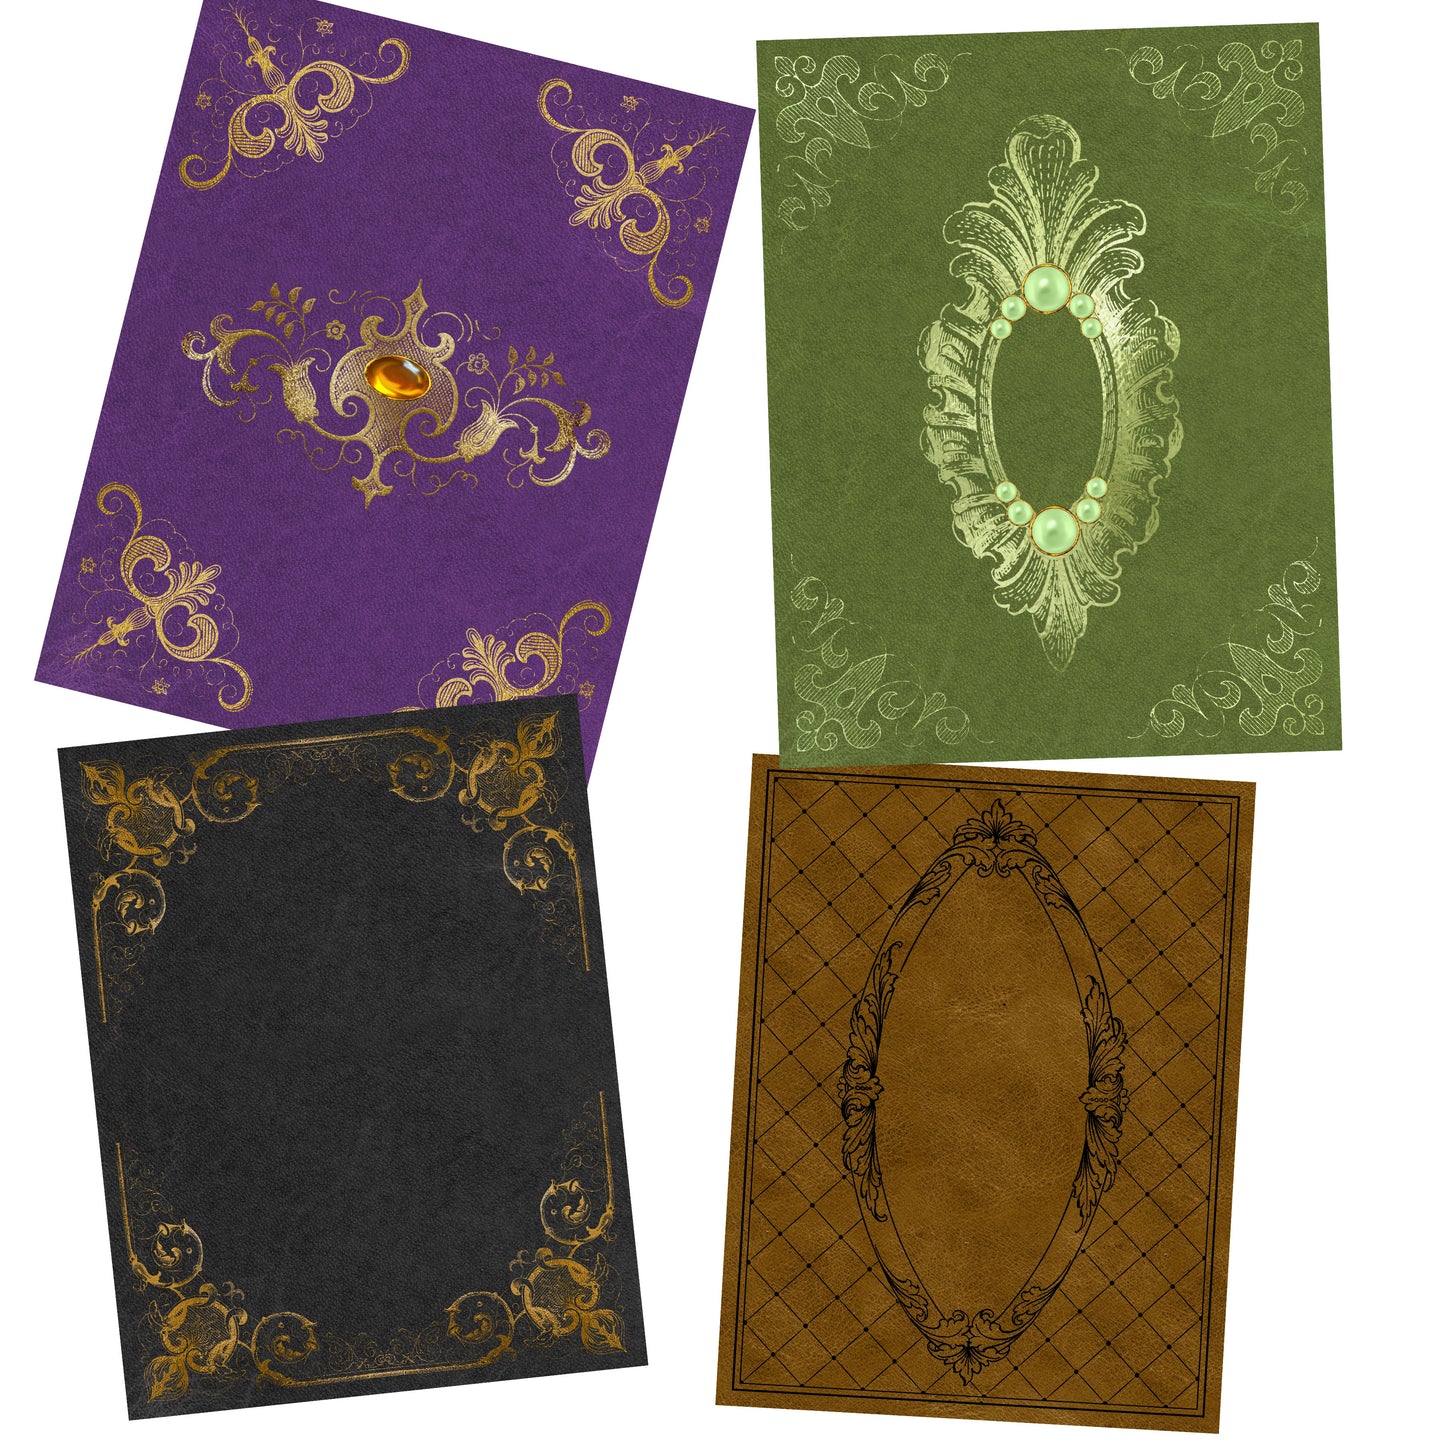 Journal Covers Collection - 3 - 7323